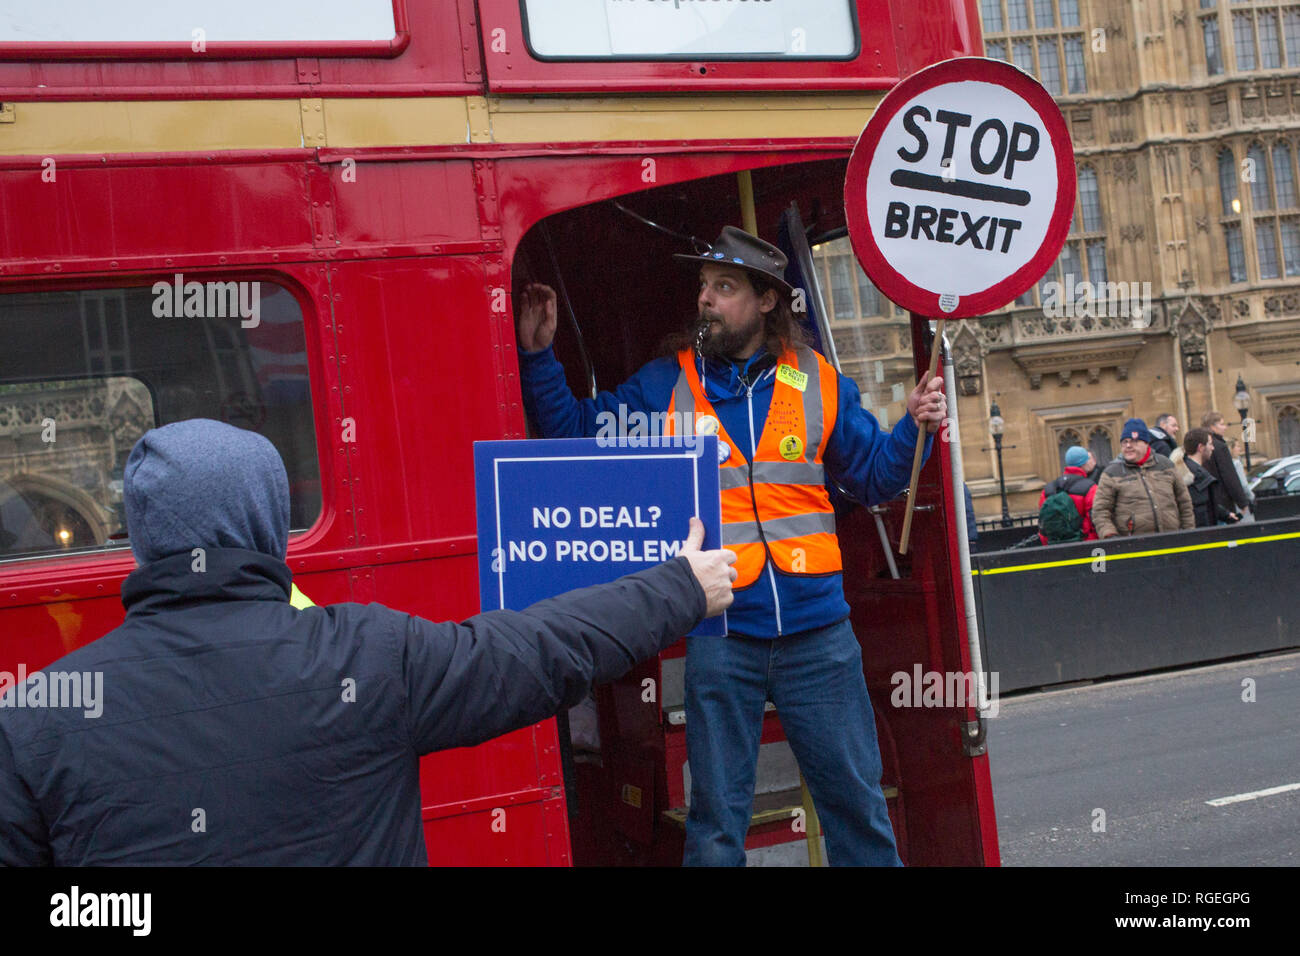 London UK 29th Jan 2019 A pro-EU protester demonstrates on a bus near the Houses of Parliament on the day MPs vote on EU withdrawal deal amendments. Credit: Thabo Jaiyesimi/Alamy Live News Stock Photo